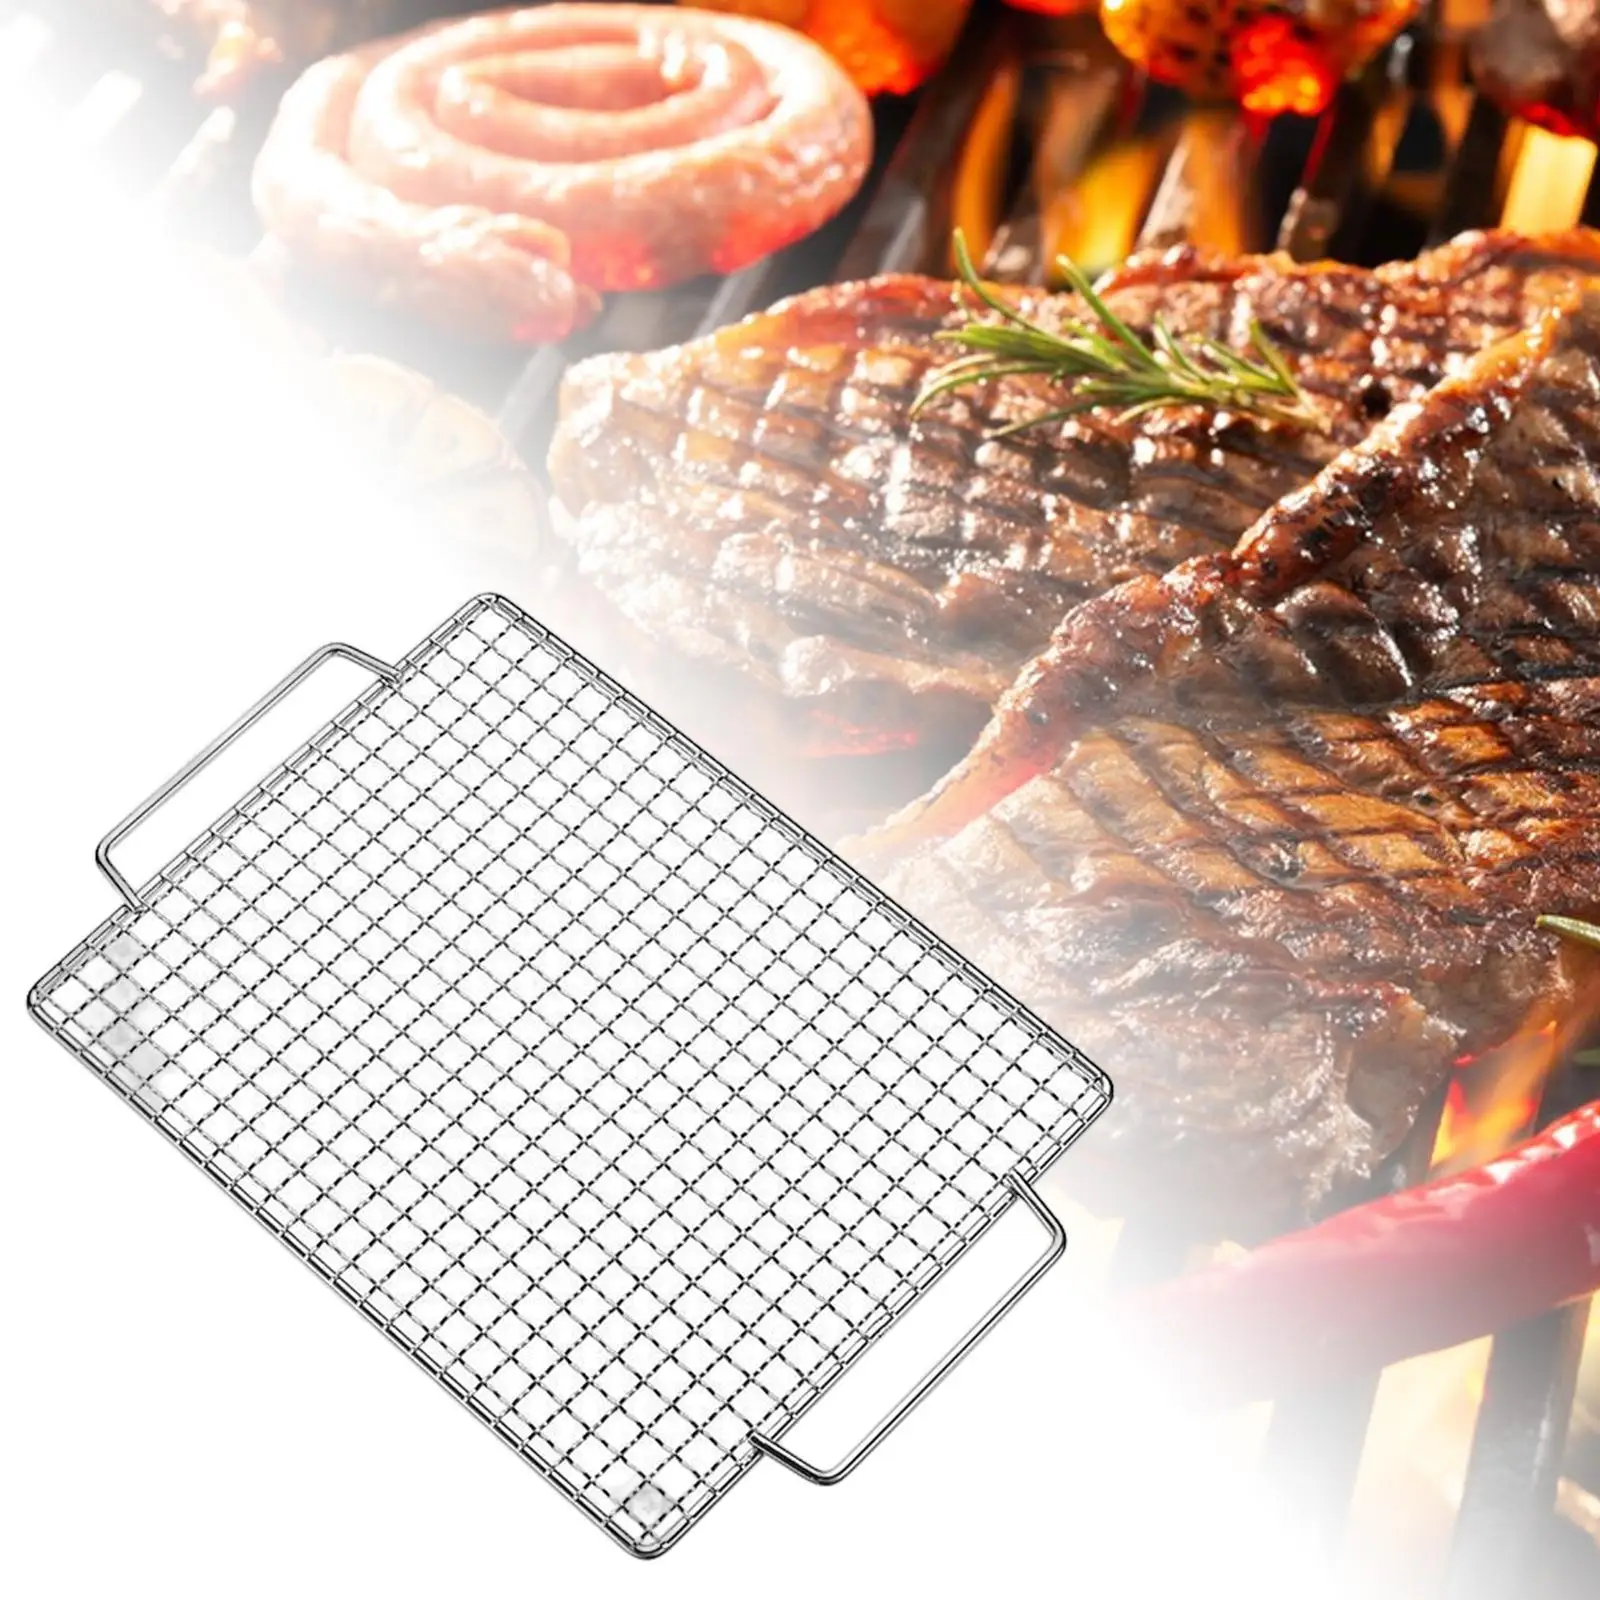 Portable Barbecue Grill Net Multifunction Stainless Steel Grill Pan Mesh for Cooking Camping Picnic Tool Garden Baking